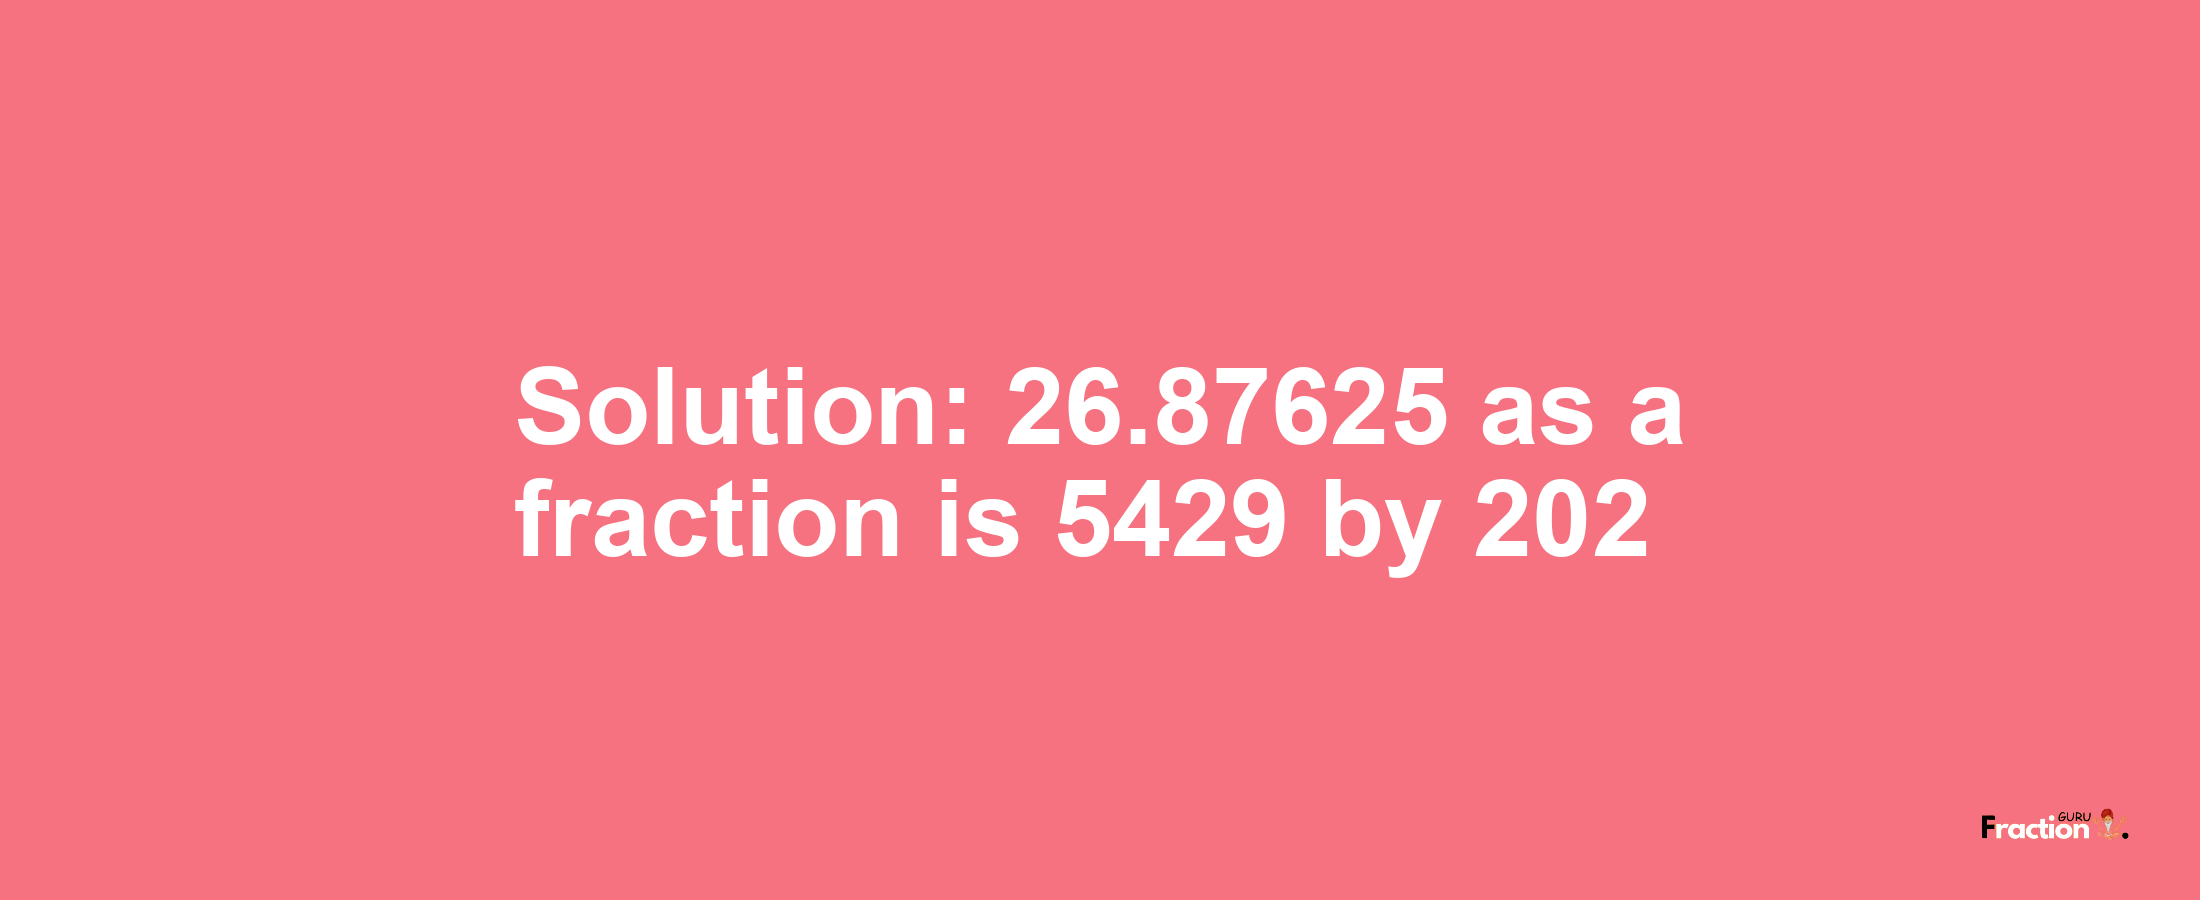 Solution:26.87625 as a fraction is 5429/202